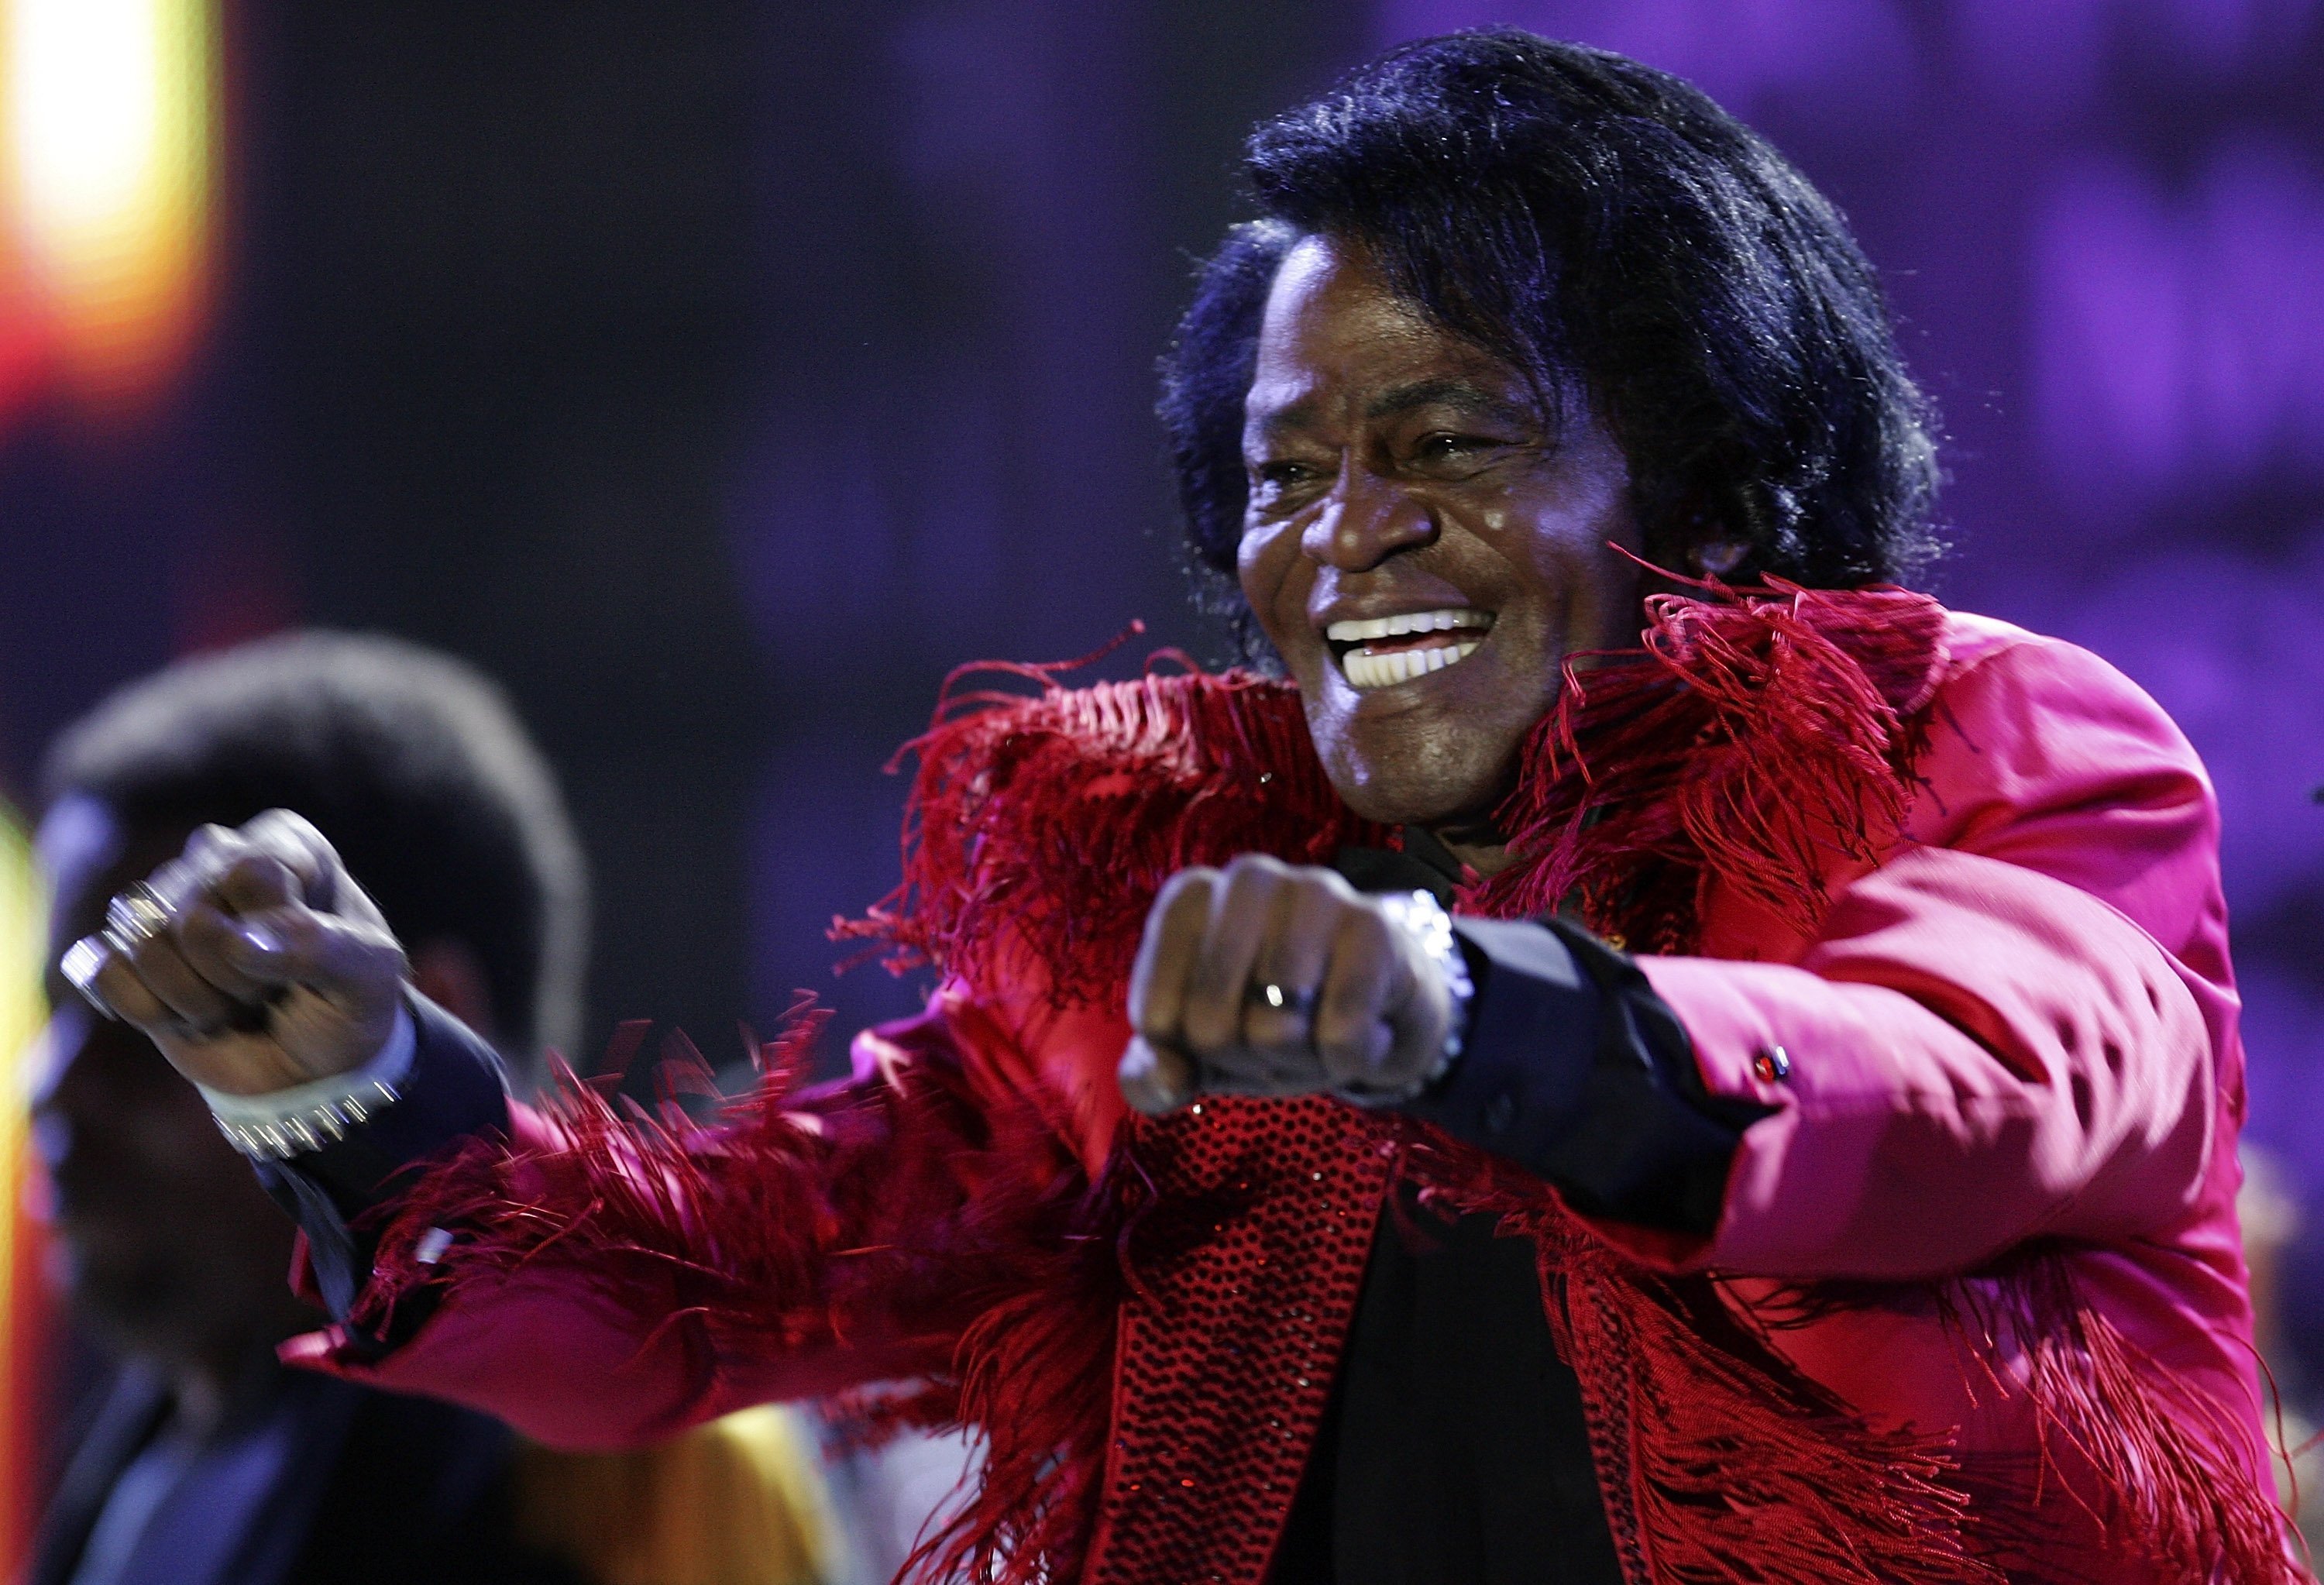 James Brown during a performance | Getty Images